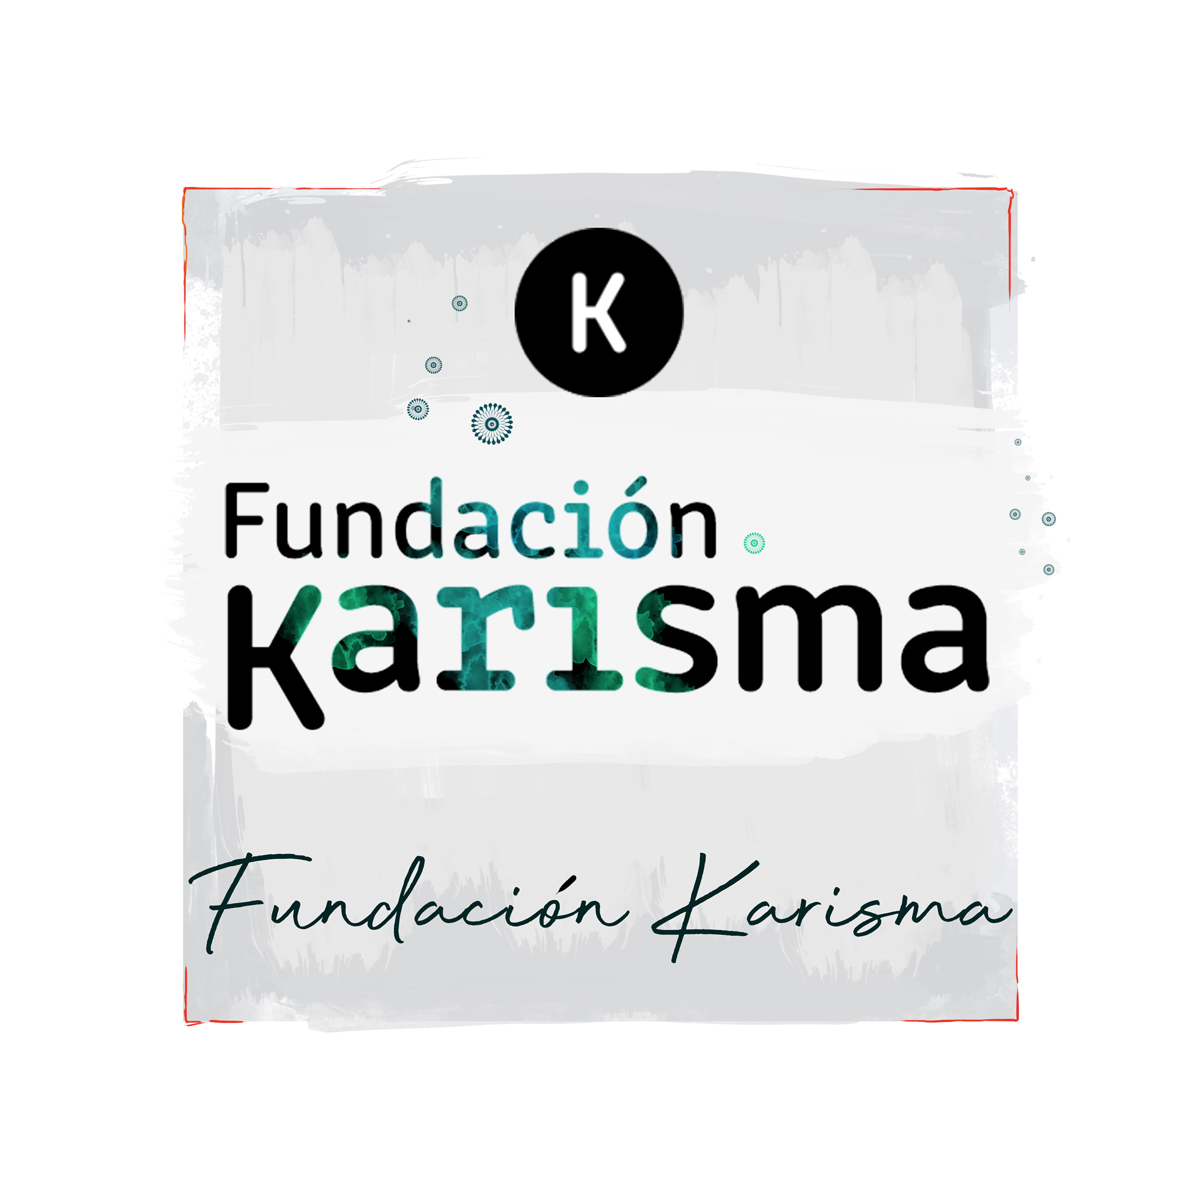 #IndexAwards2019: Colombia’s Fundación Karisma works to enhance digital rights